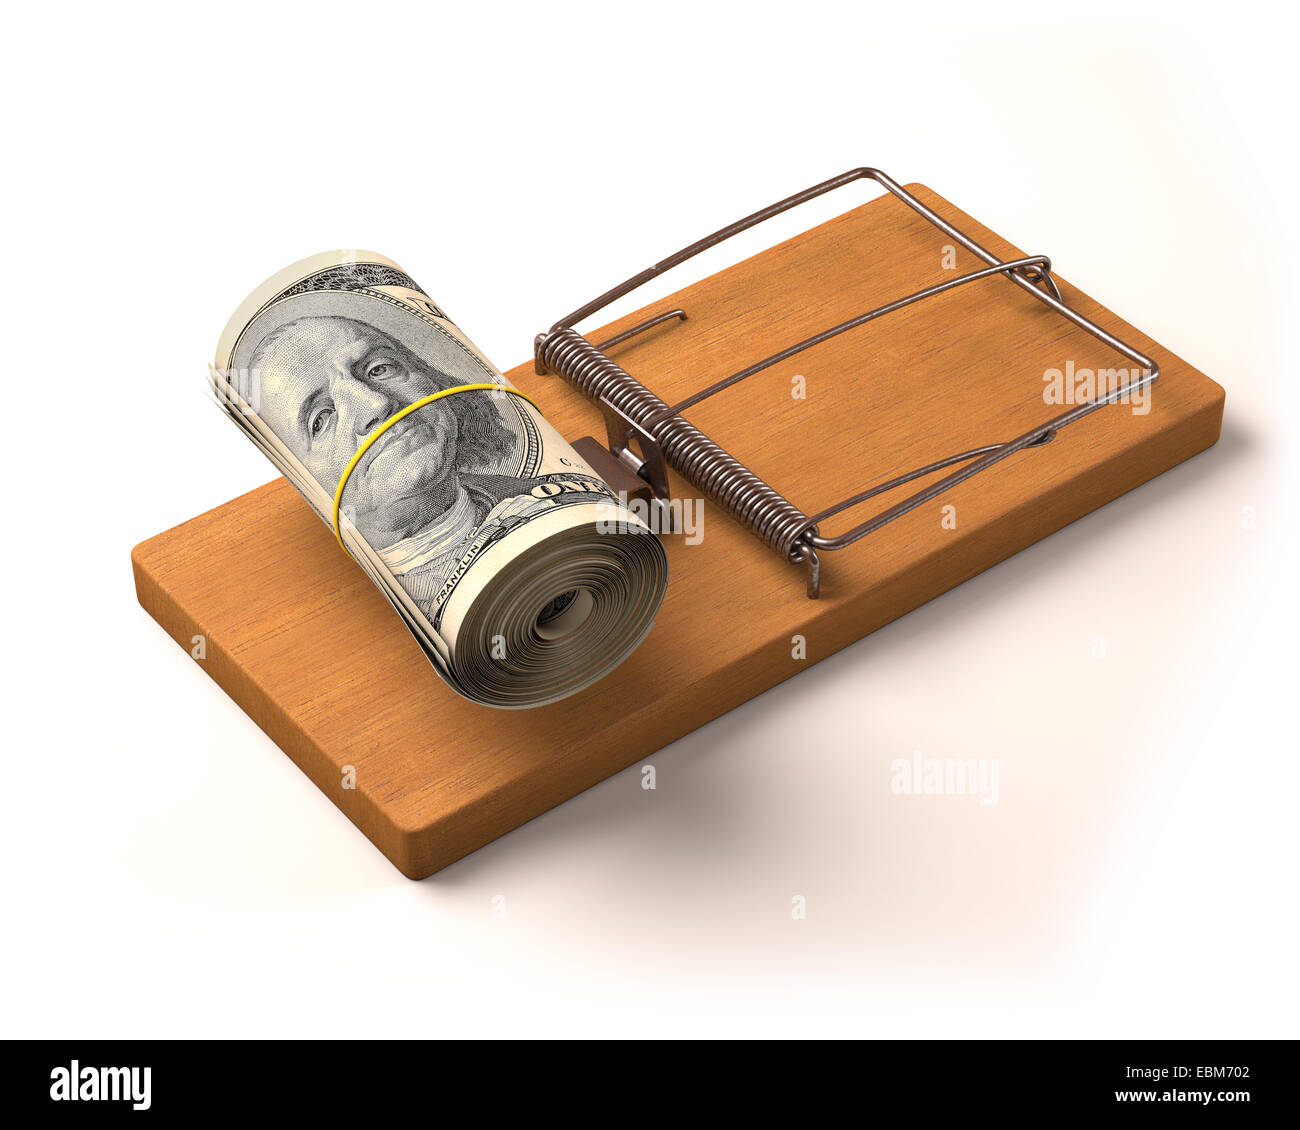 Wad of cash as bait in a trap. Depth of field. Clipping path included. Stock Photo